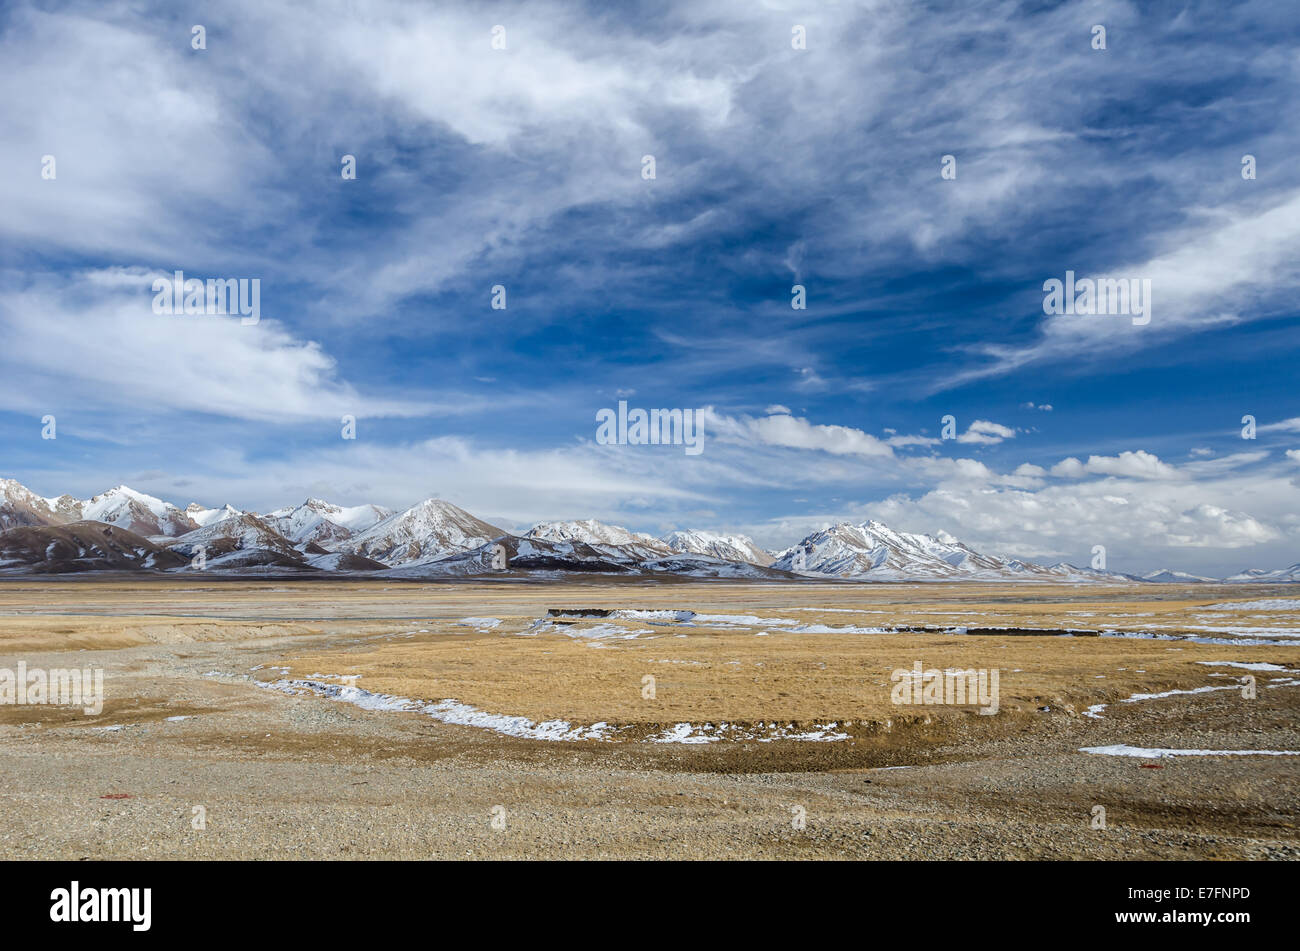 Amazing view of the high altitude Tibetan plateau and cloudy sky at Qinghai province Stock Photo